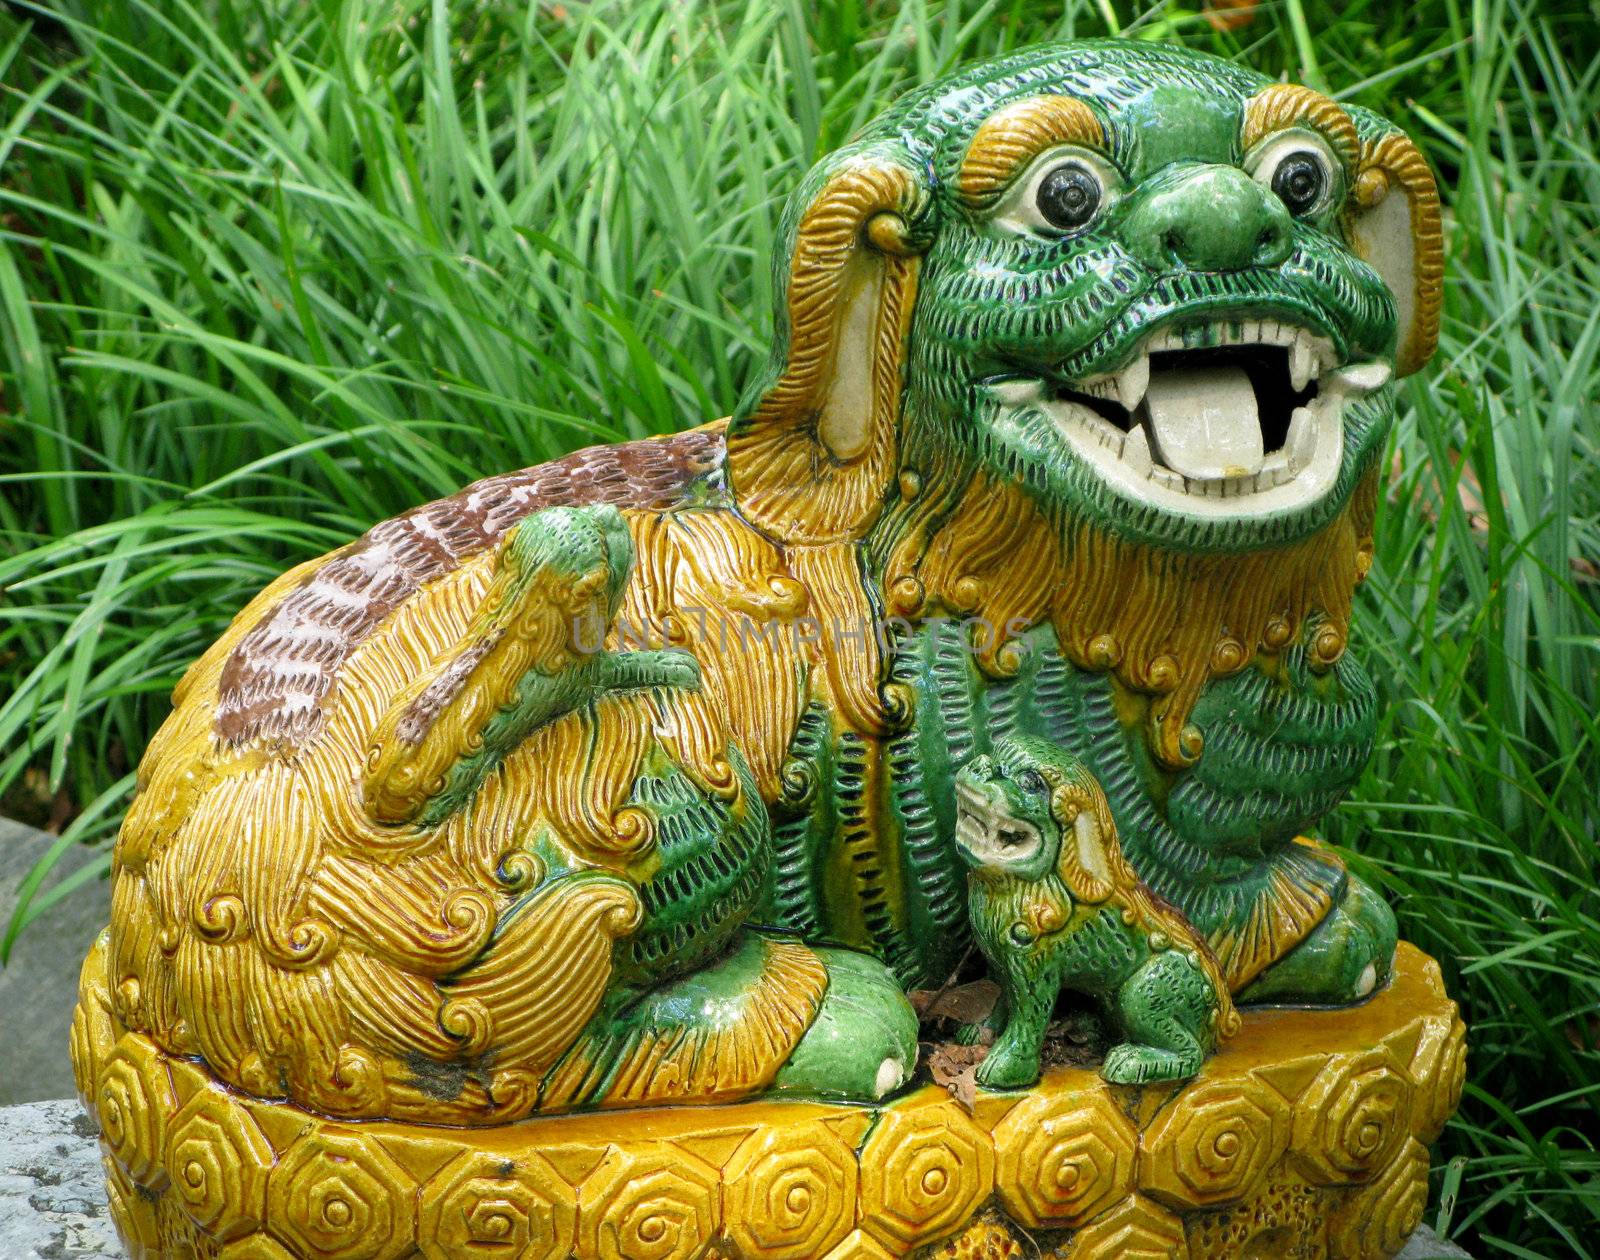 Pottery lion in grass by steheap